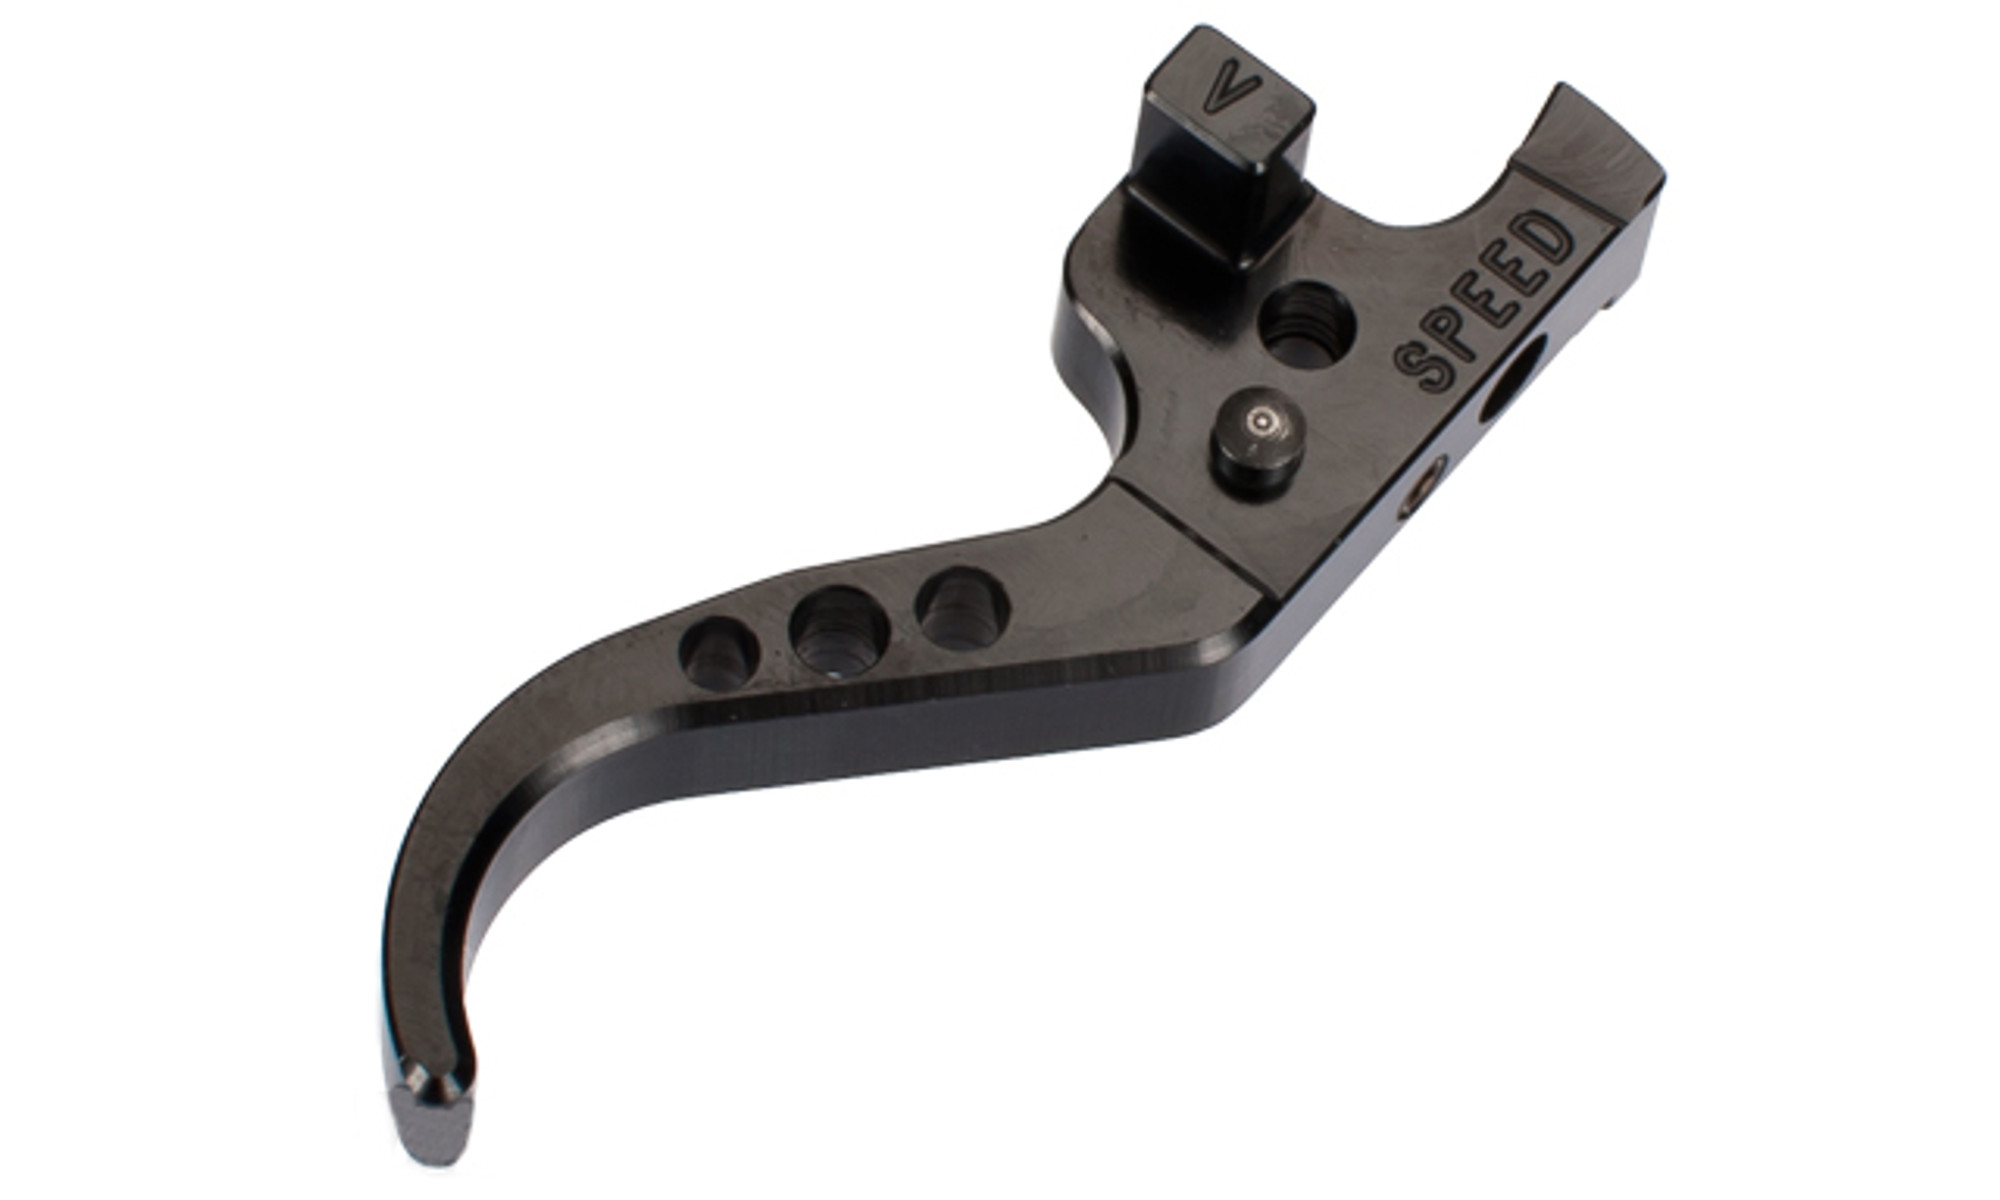 SPEED Airsoft CNC Aluminum Tunable Trigger for VSR-10 Aisoft Spring Sniper Rifles - Black